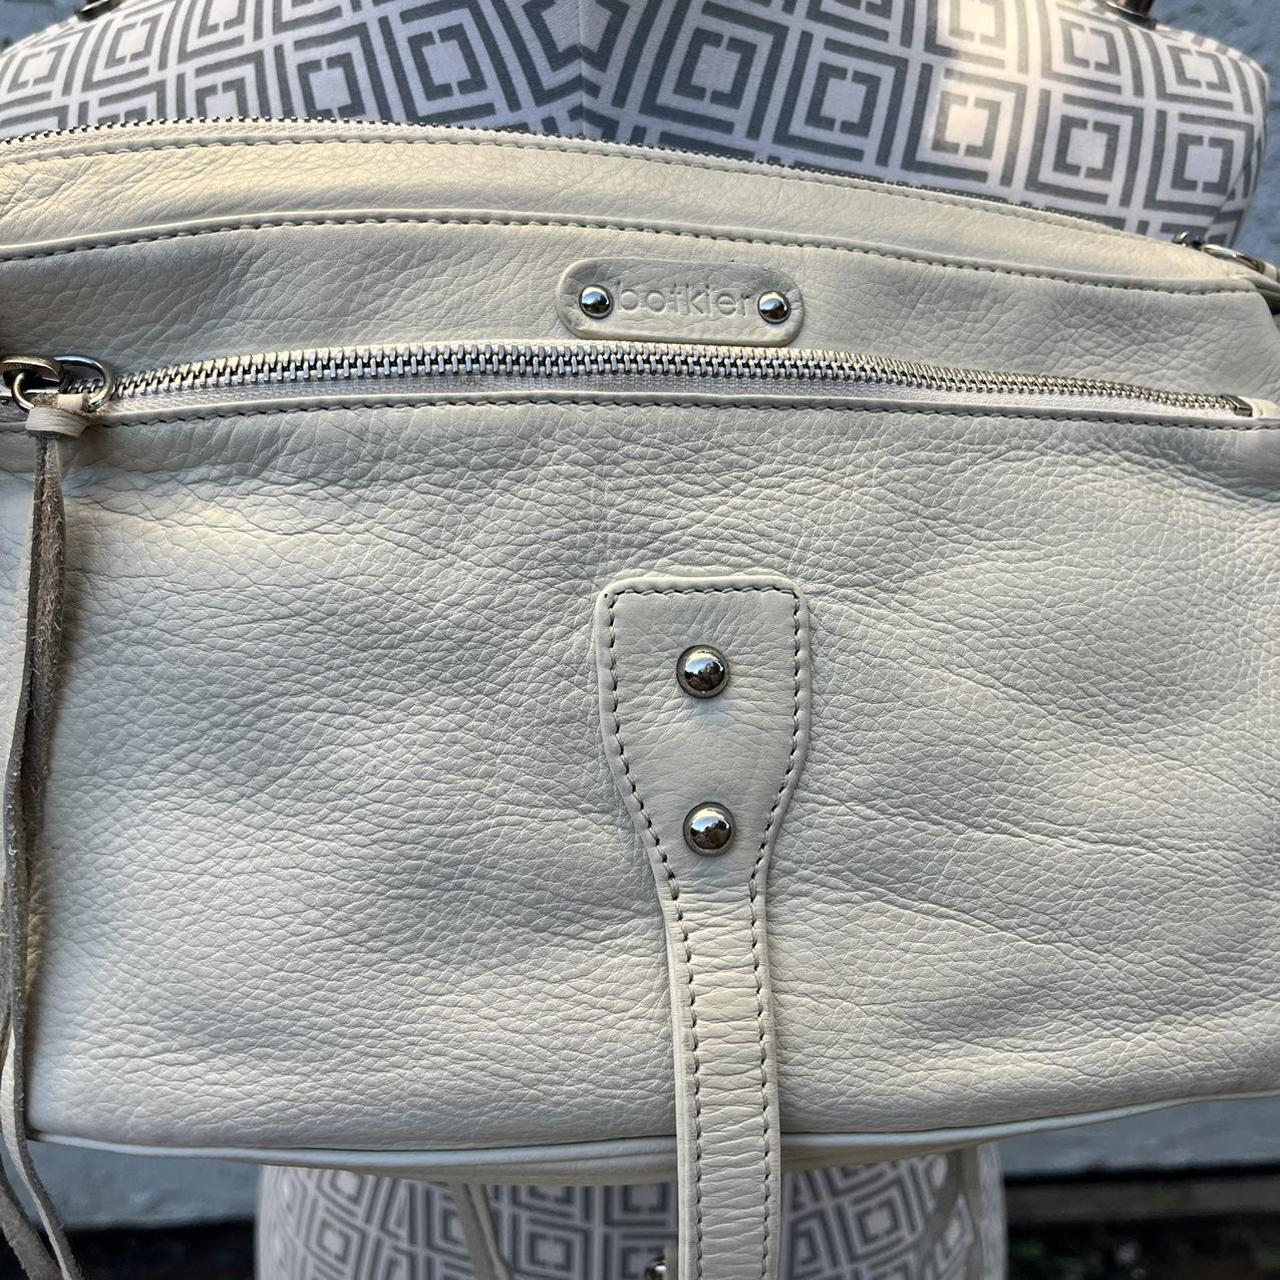 Botkier Women's White and Silver Bag (4)